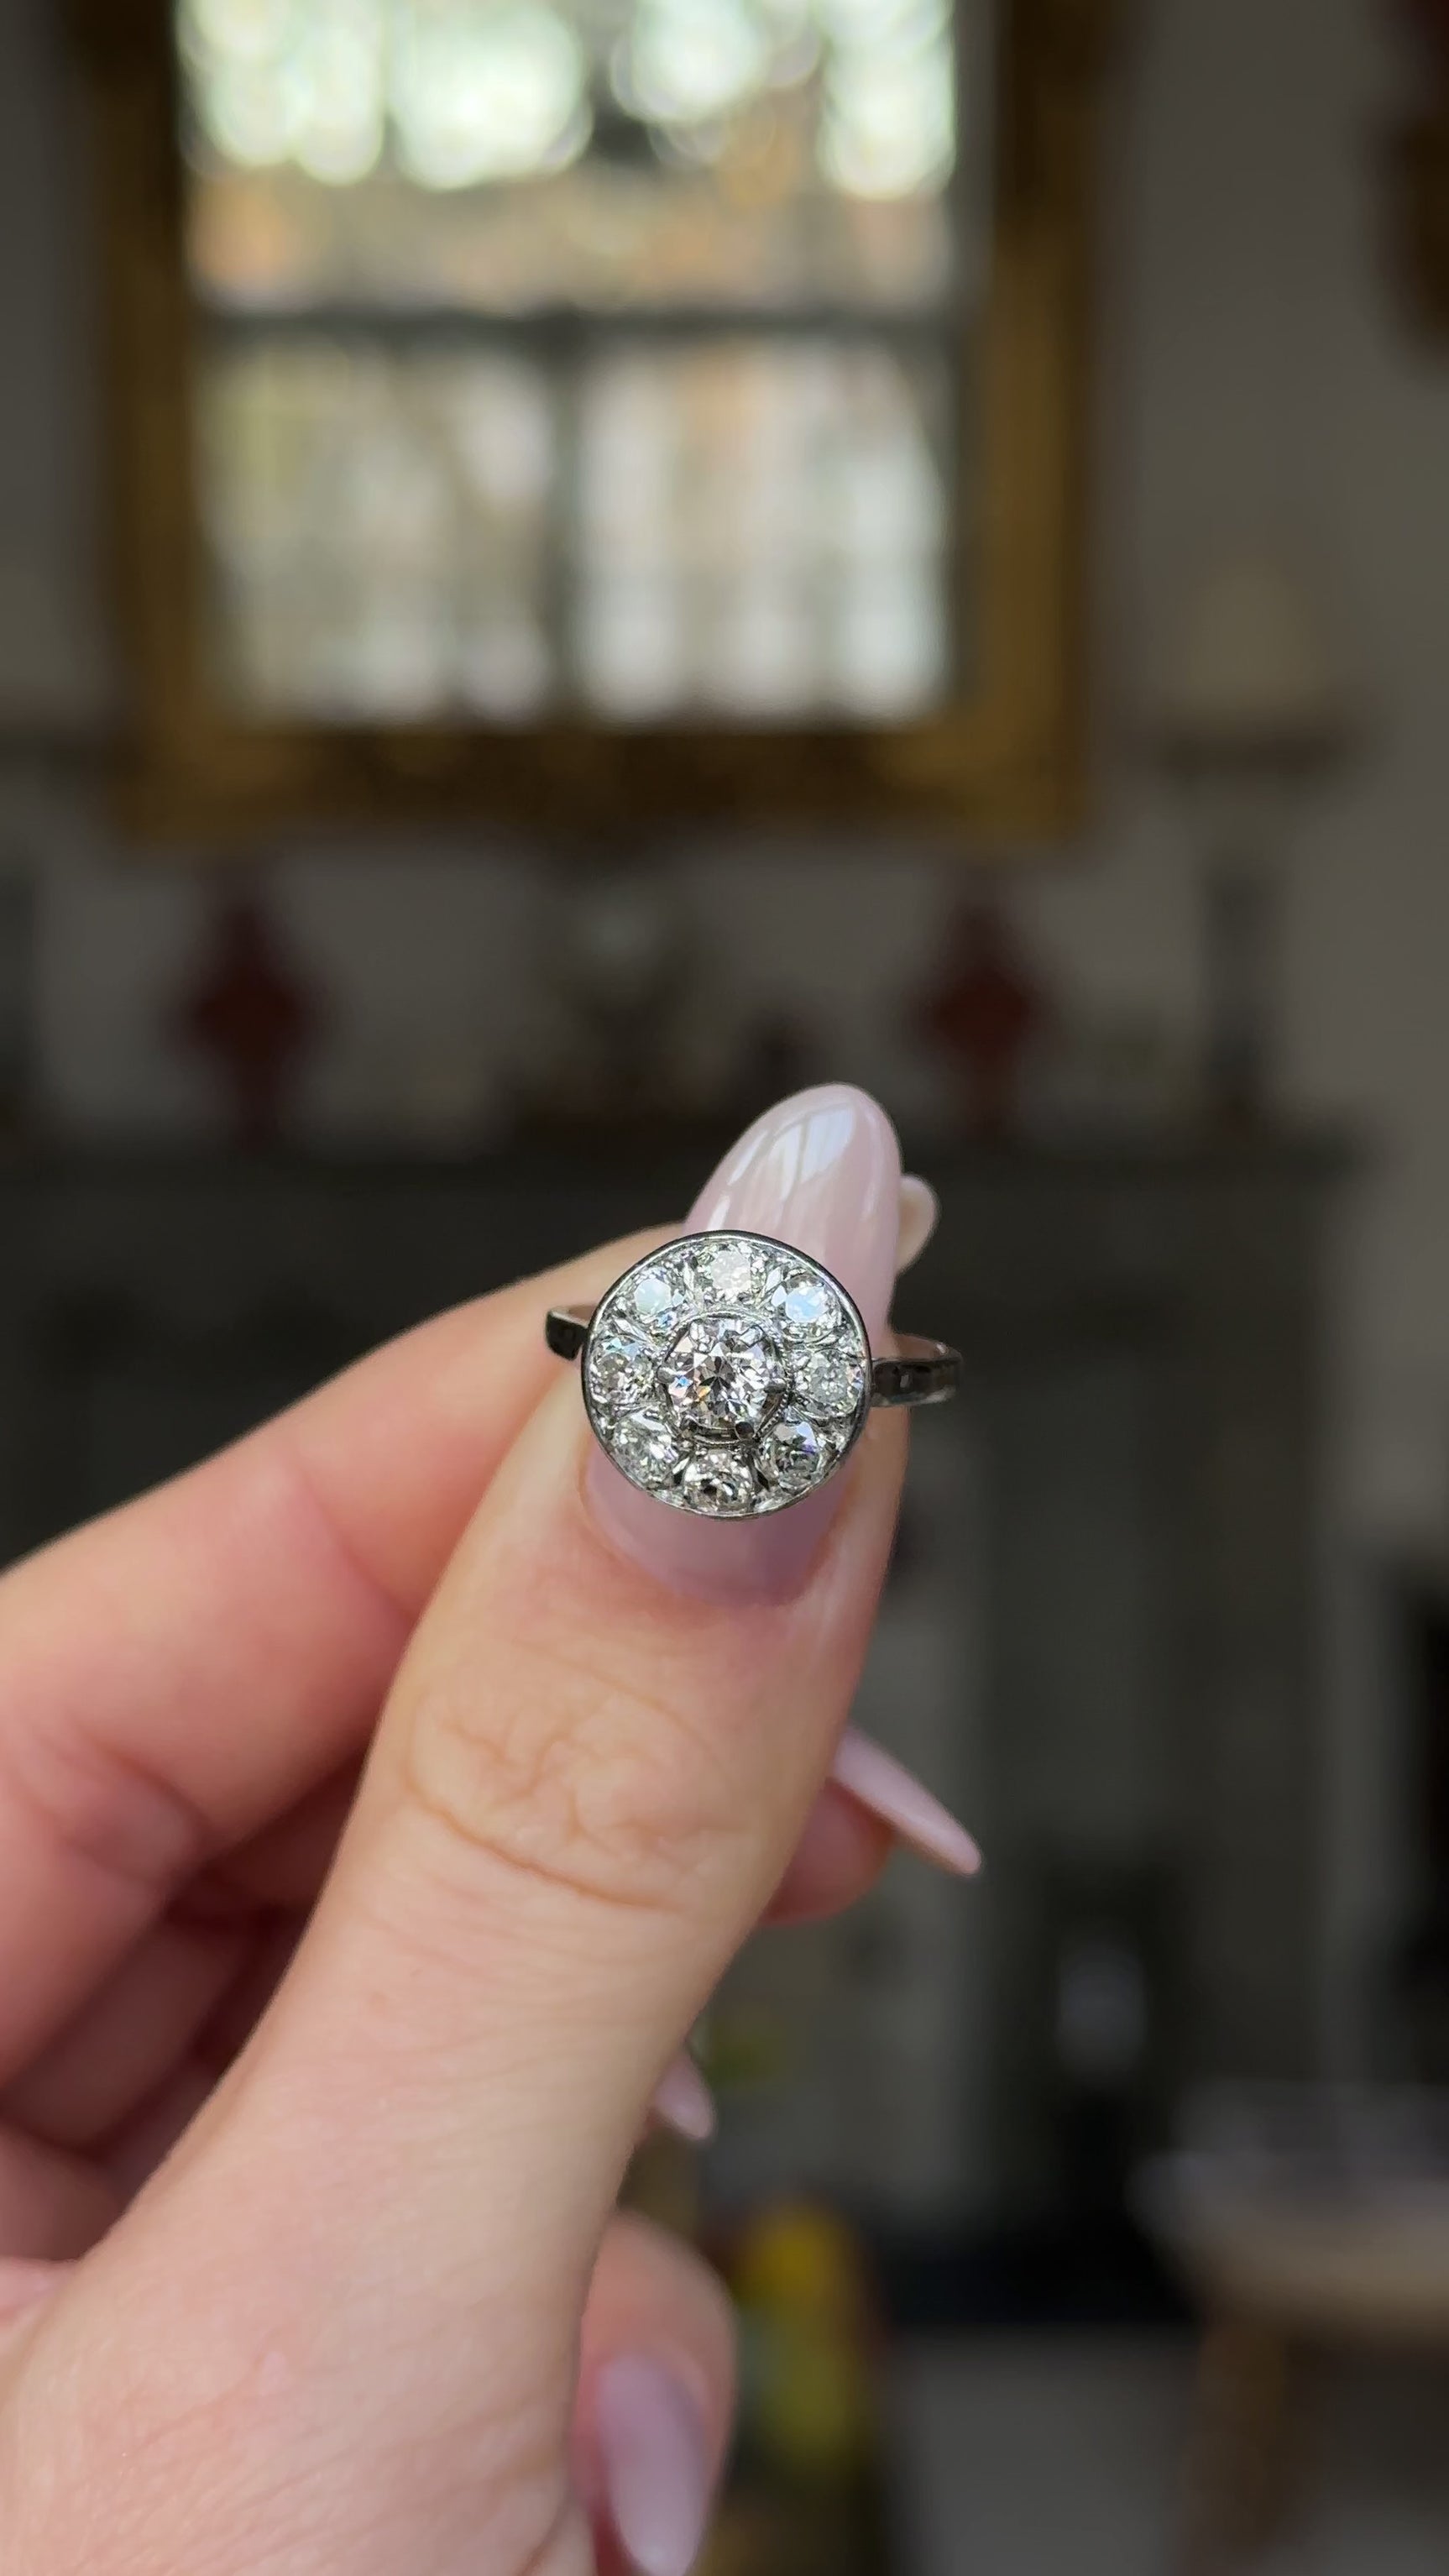 Art deco  diamond cluster ring held in fingers and moved around to give perspective.